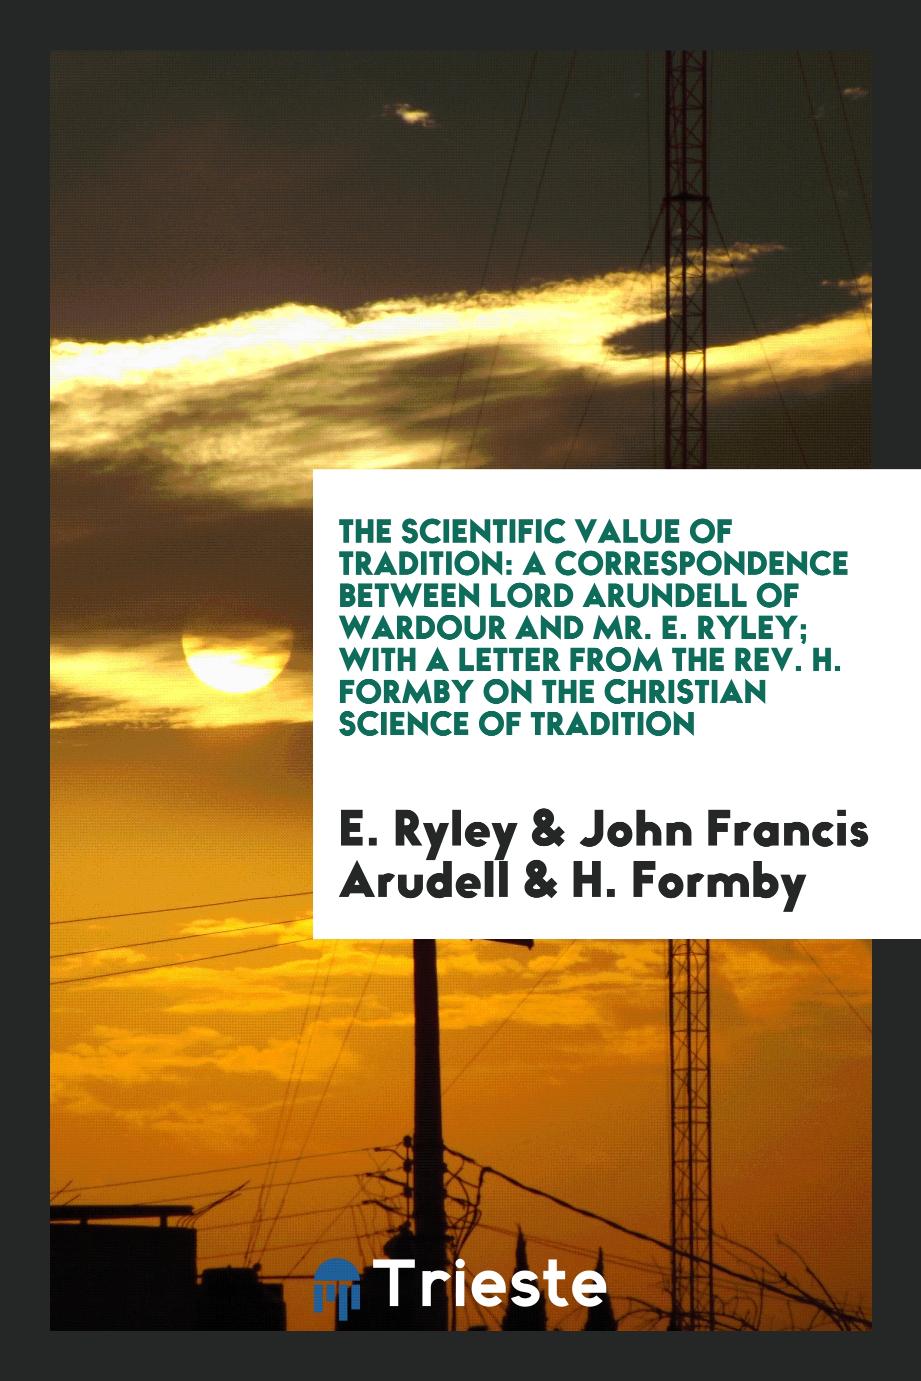 The Scientific Value of Tradition: A Correspondence Between Lord Arundell of Wardour and Mr. E. Ryley; With a Letter from the Rev. H. Formby on the Christian Science of Tradition